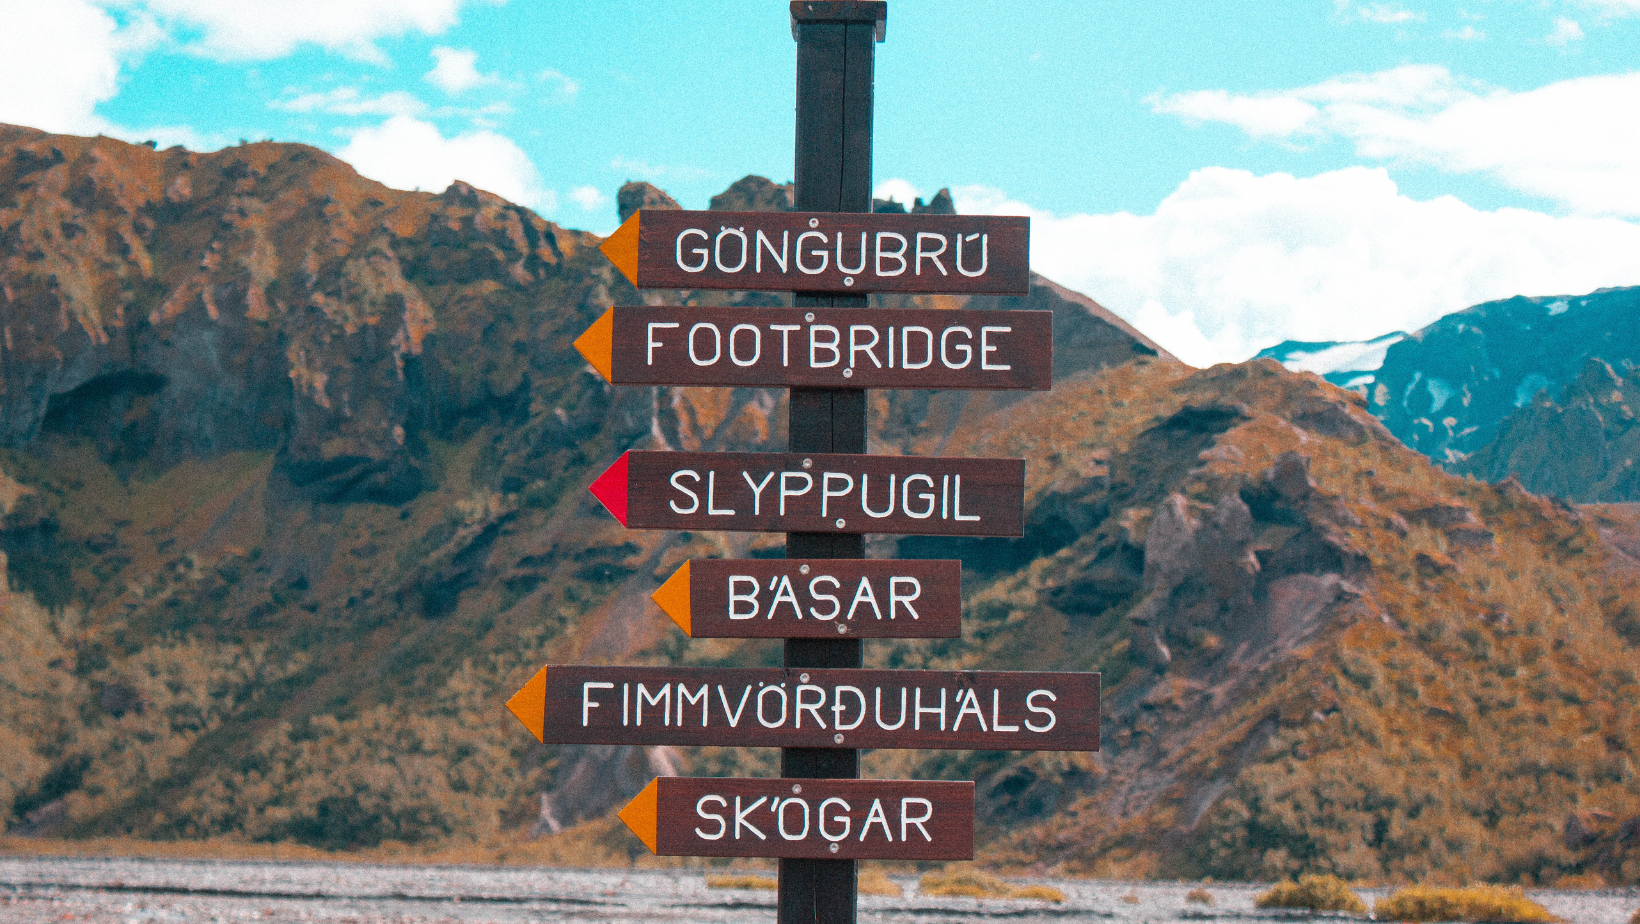 Wooden signs pointing to the directions of different hiking routes in Þórsmörk